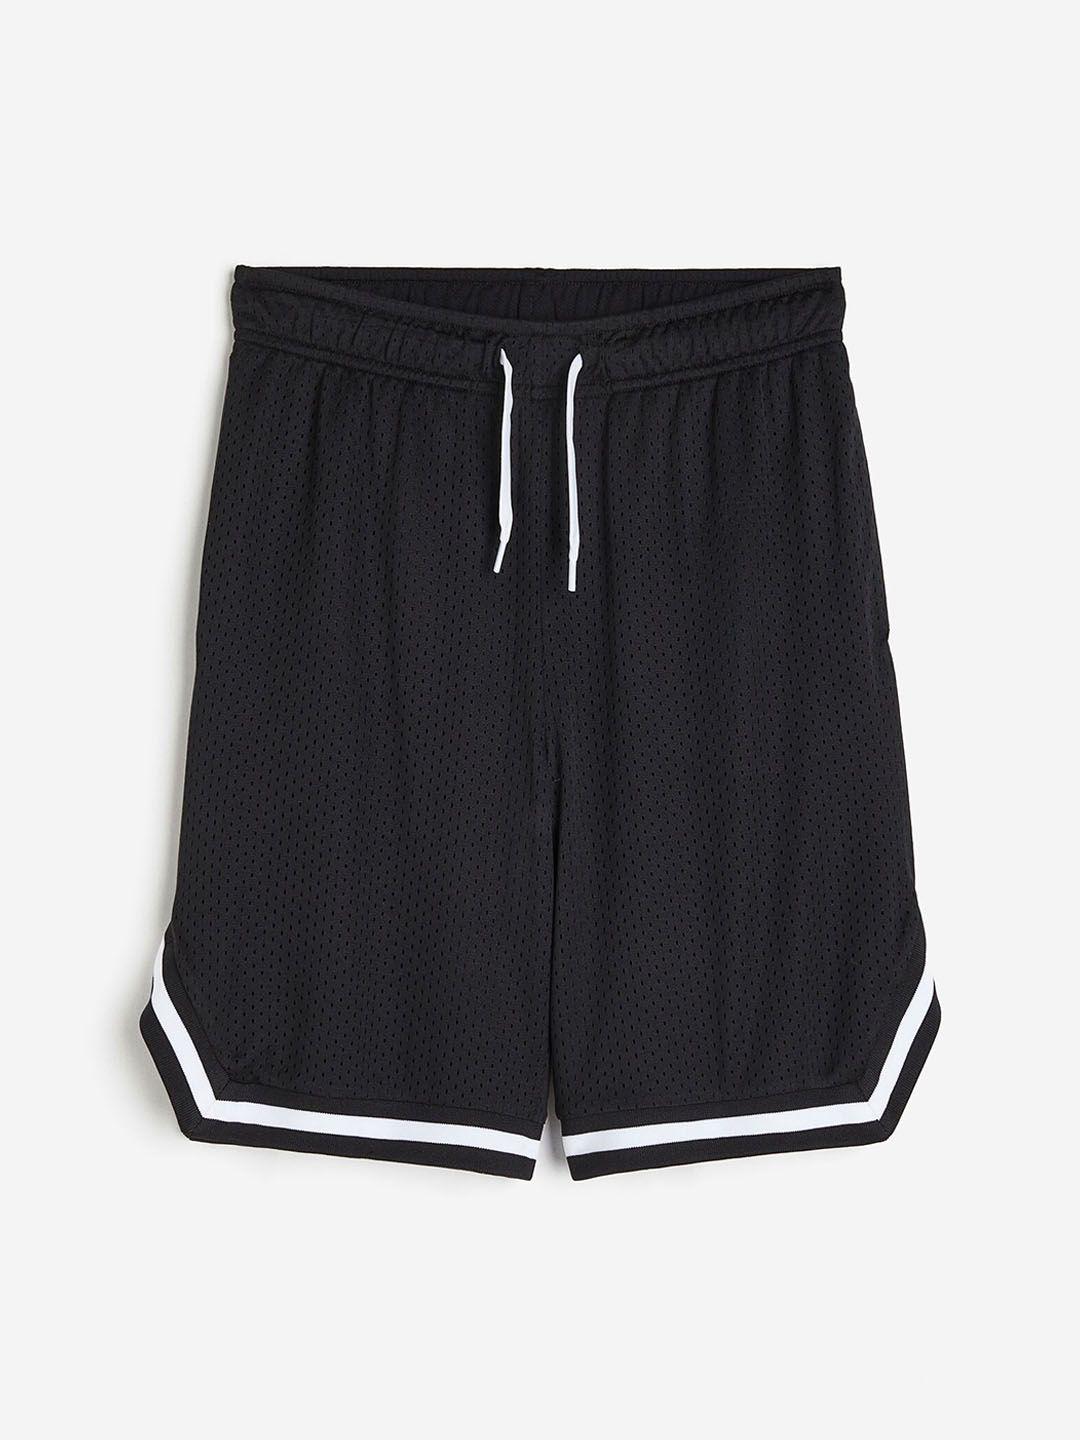 h&m dry move loose-fit basketball shorts